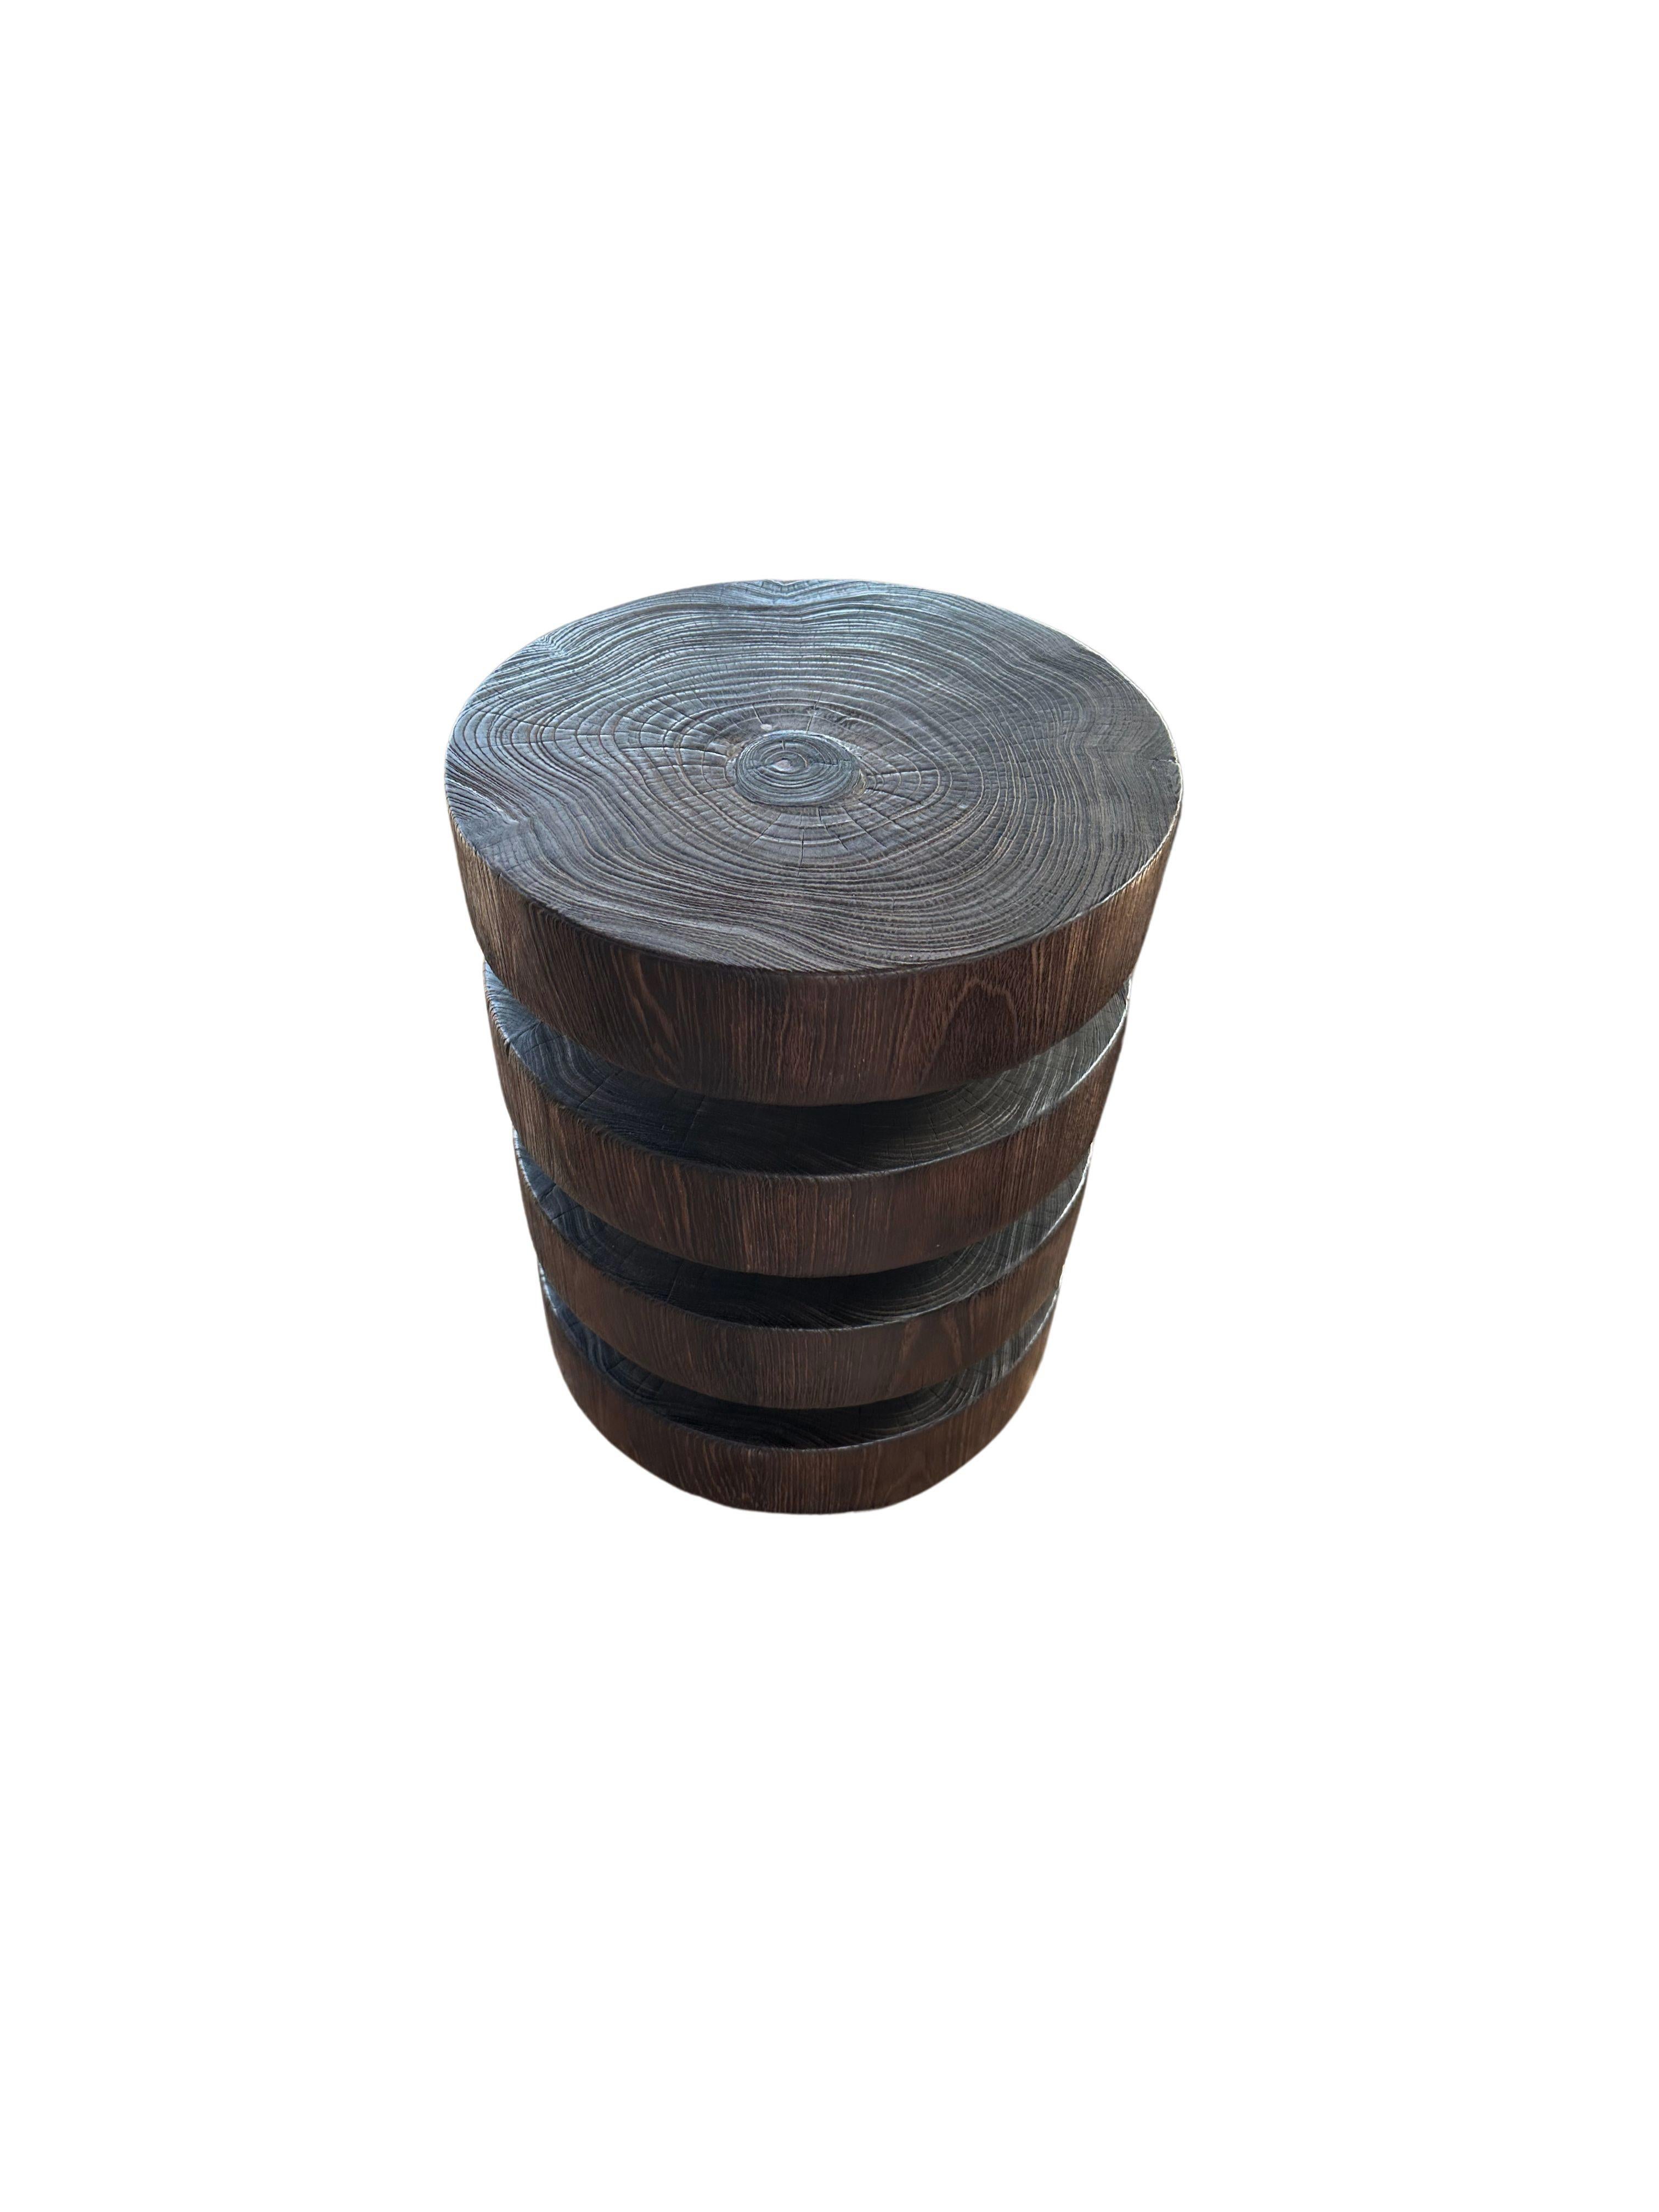 A wonderfully sculpted side table, crafted from a single block of teak wood. It features wonderful wood textures as well and carved detailing that wrap around its sides. To achieve its pigment the wood was burnt several times and finished with a